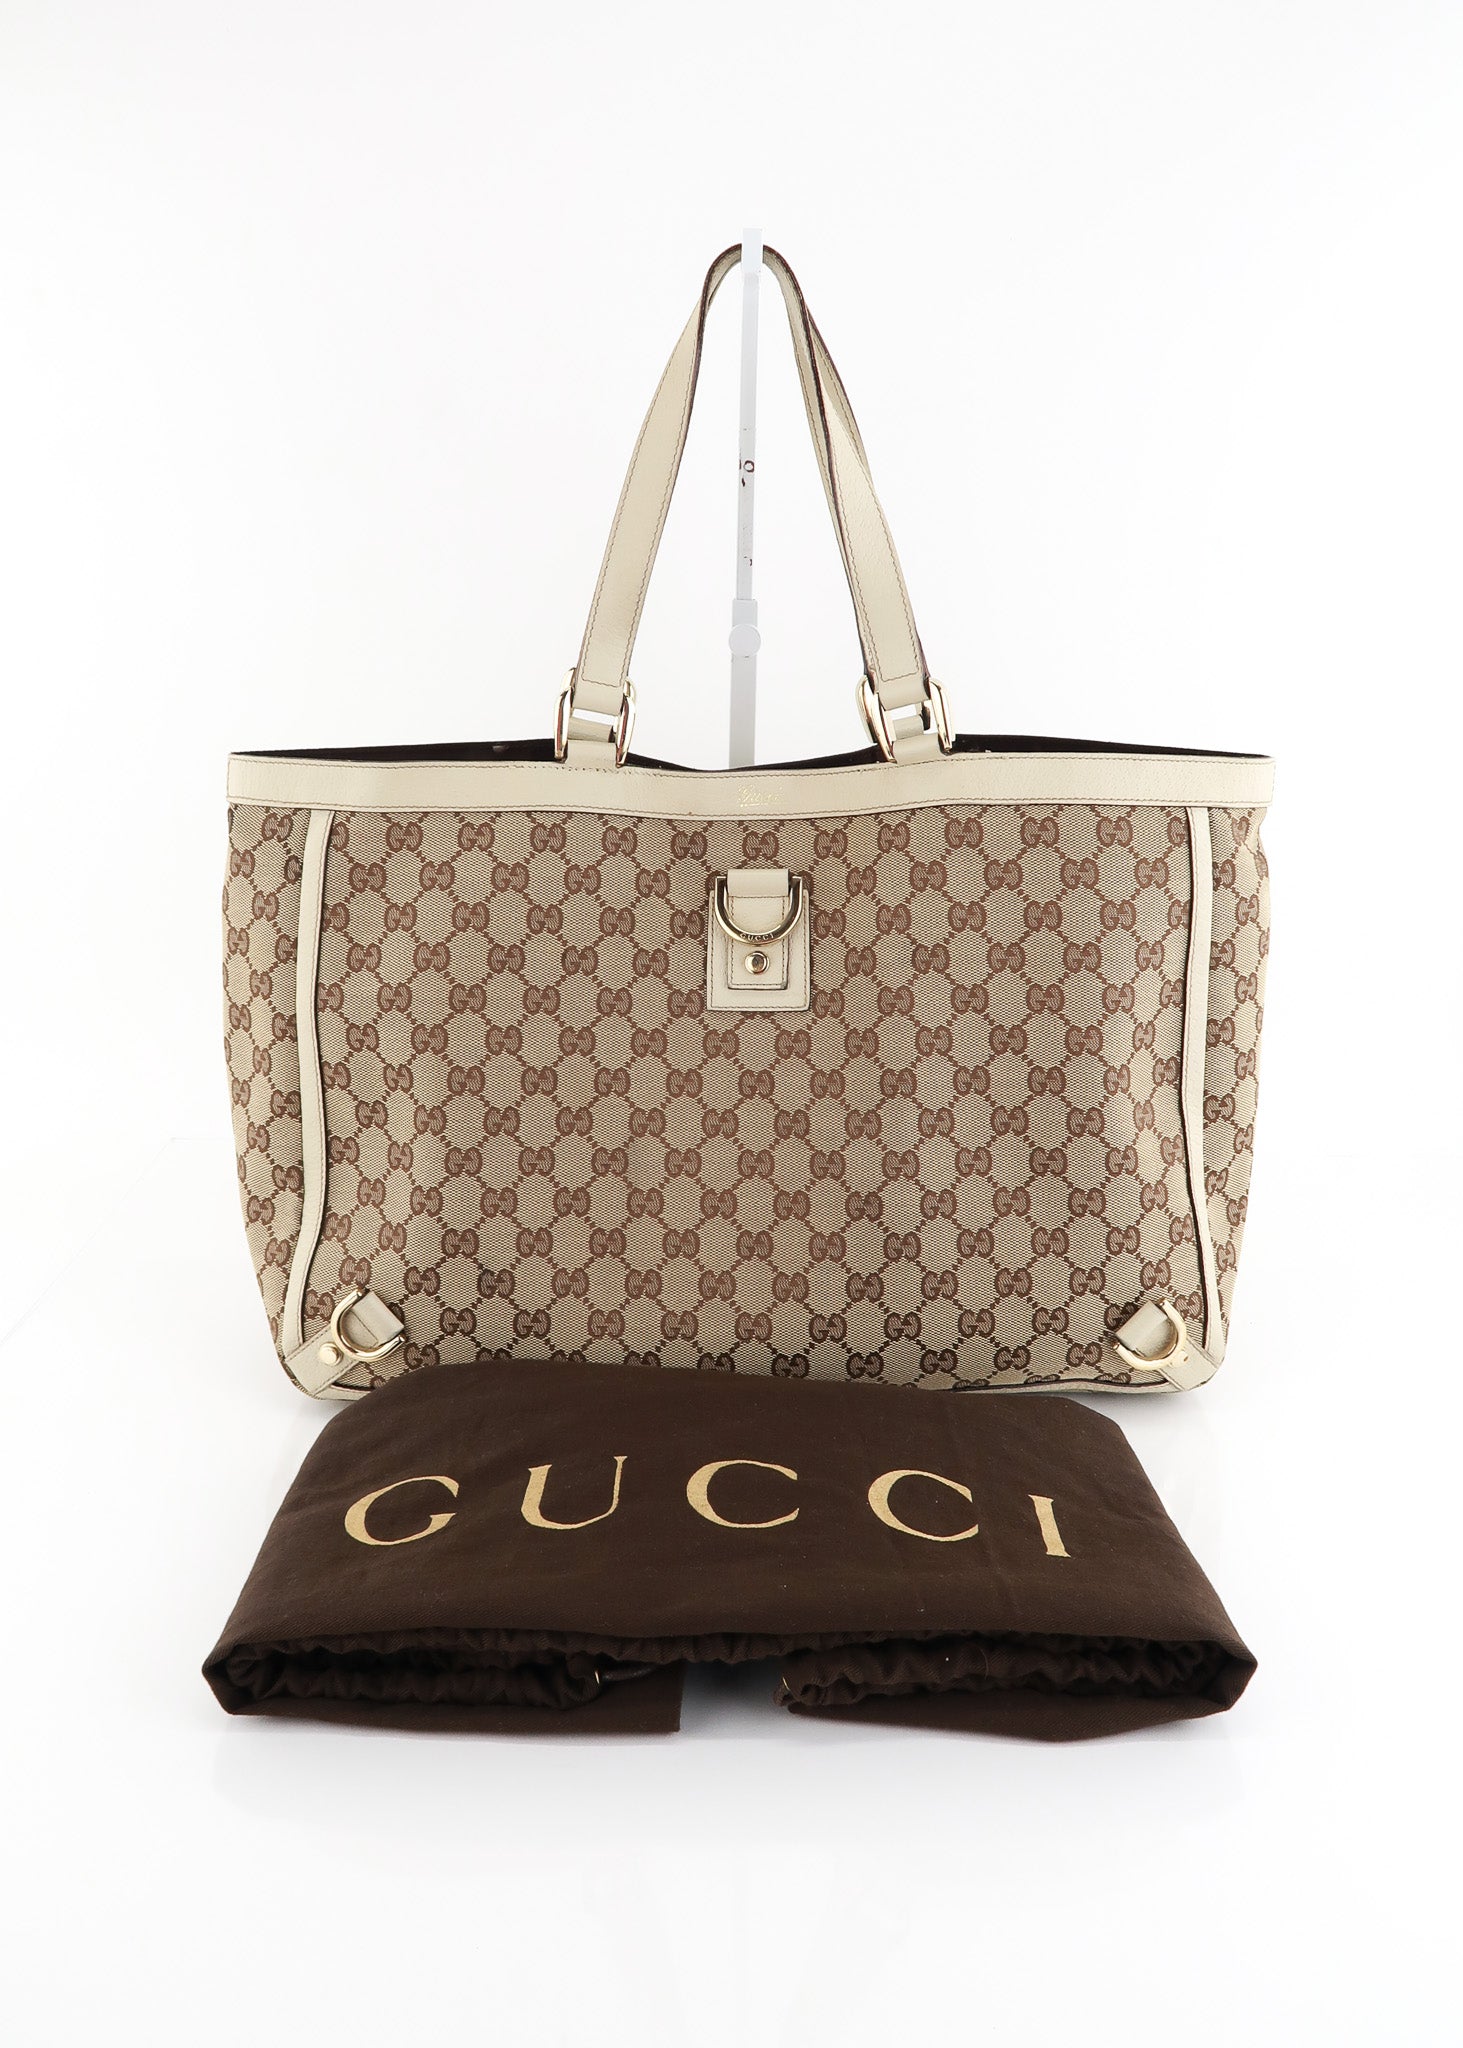 Gucci Leather Abbey Tote - Blue Totes, Handbags - GUC1472907 | The RealReal